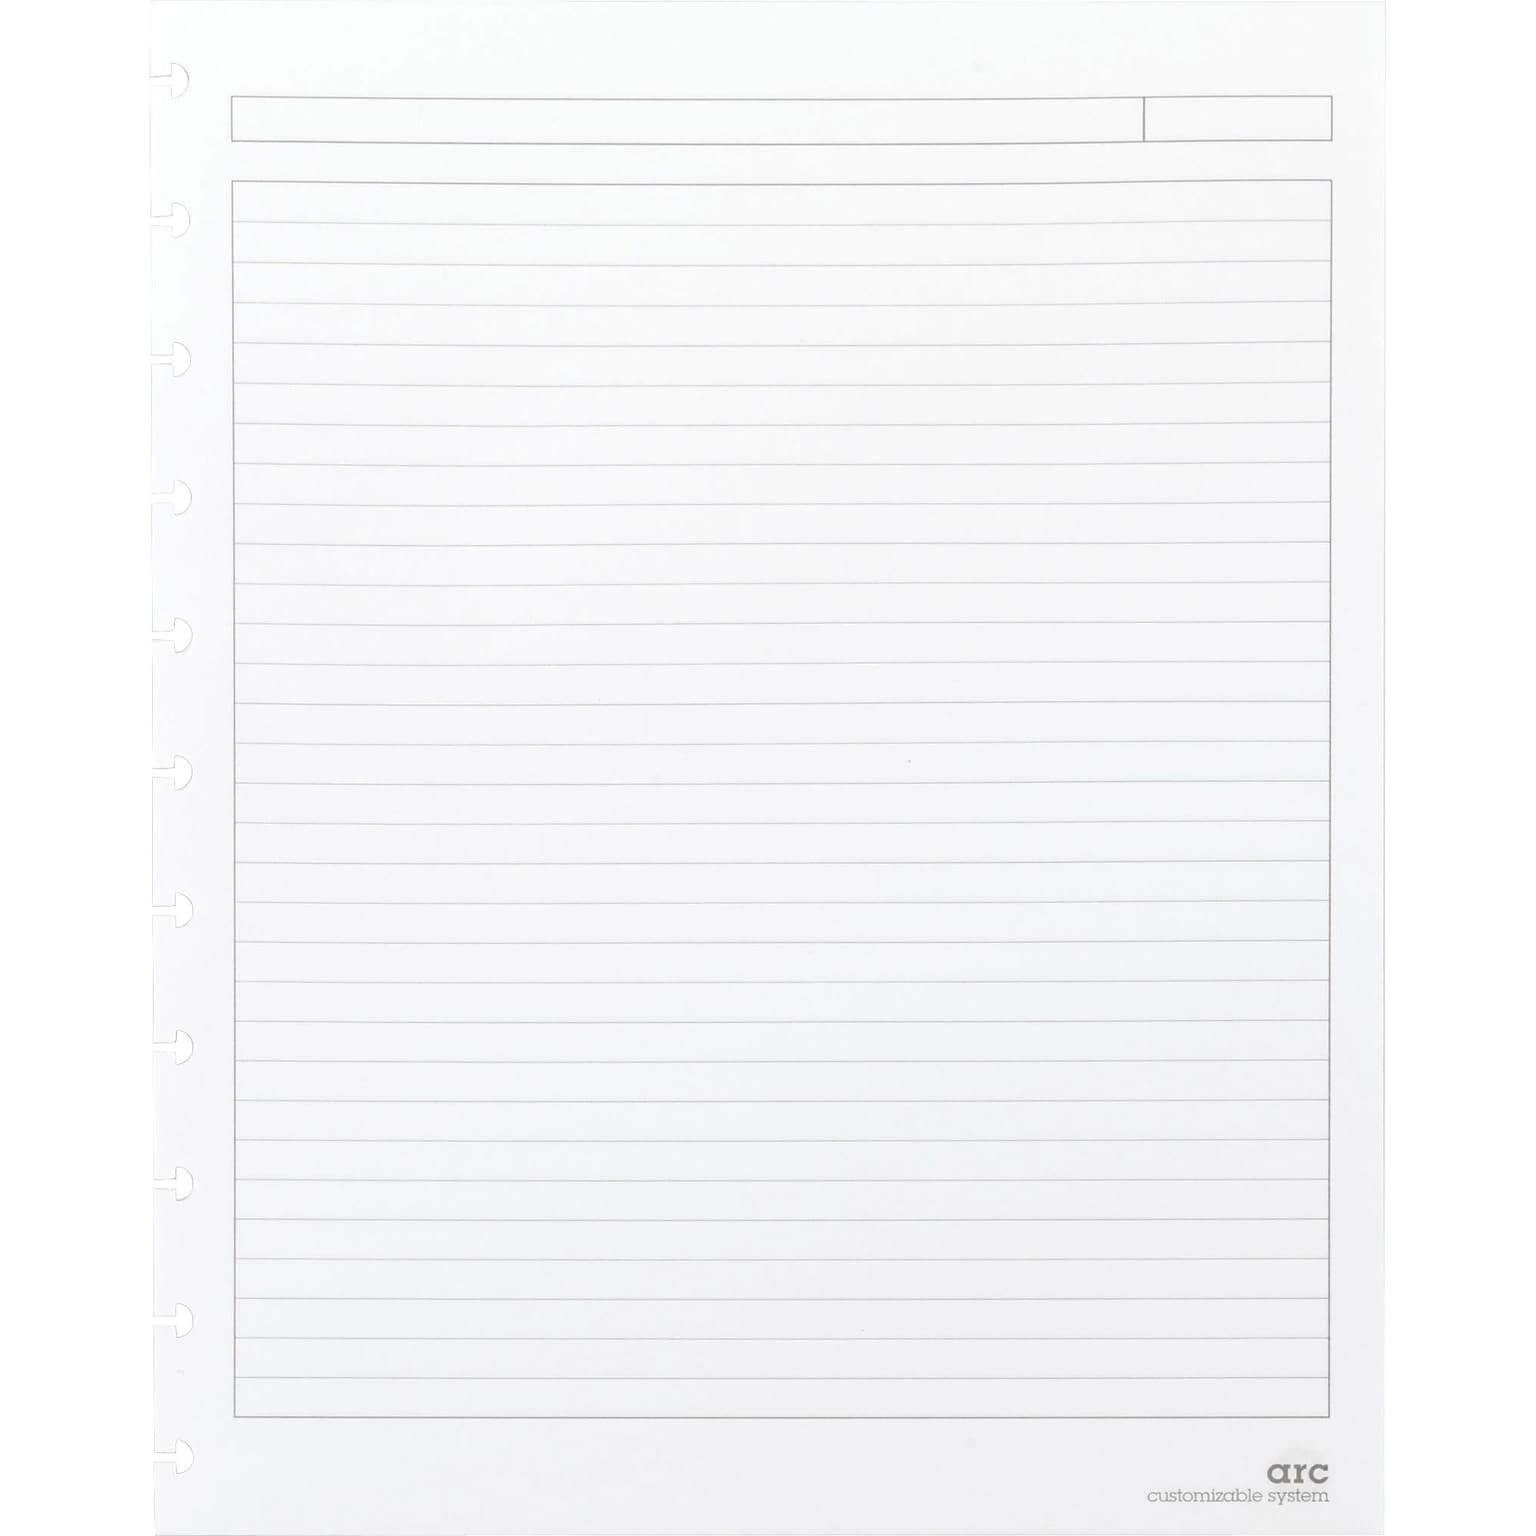 Staples® Arc Notebook System Premium Refill Paper, 8.5 x 11, 50 Sheets, Narrow Ruled, White (19992)